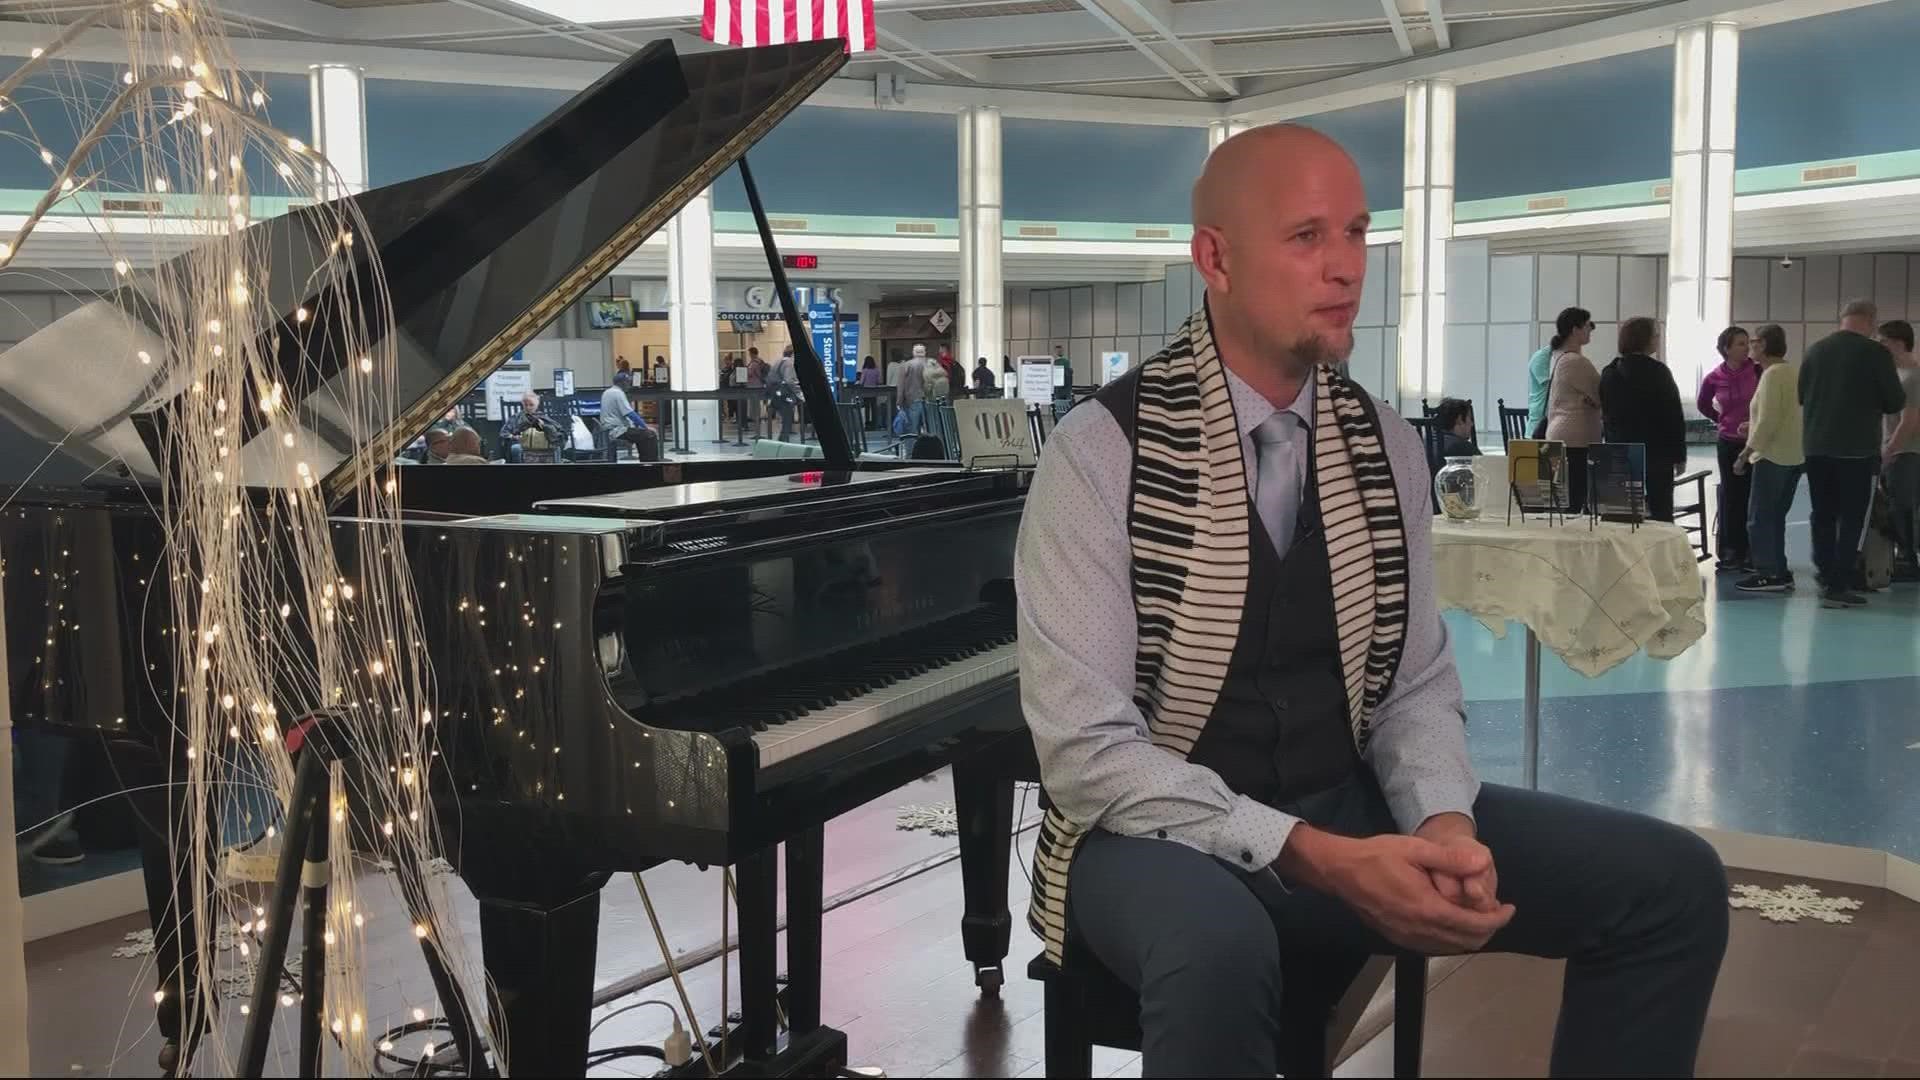 You can thank Jeremy Weinglass for the song in your head while you board your plane. He plays inside Jacksonville's airport for their arts and culture program.